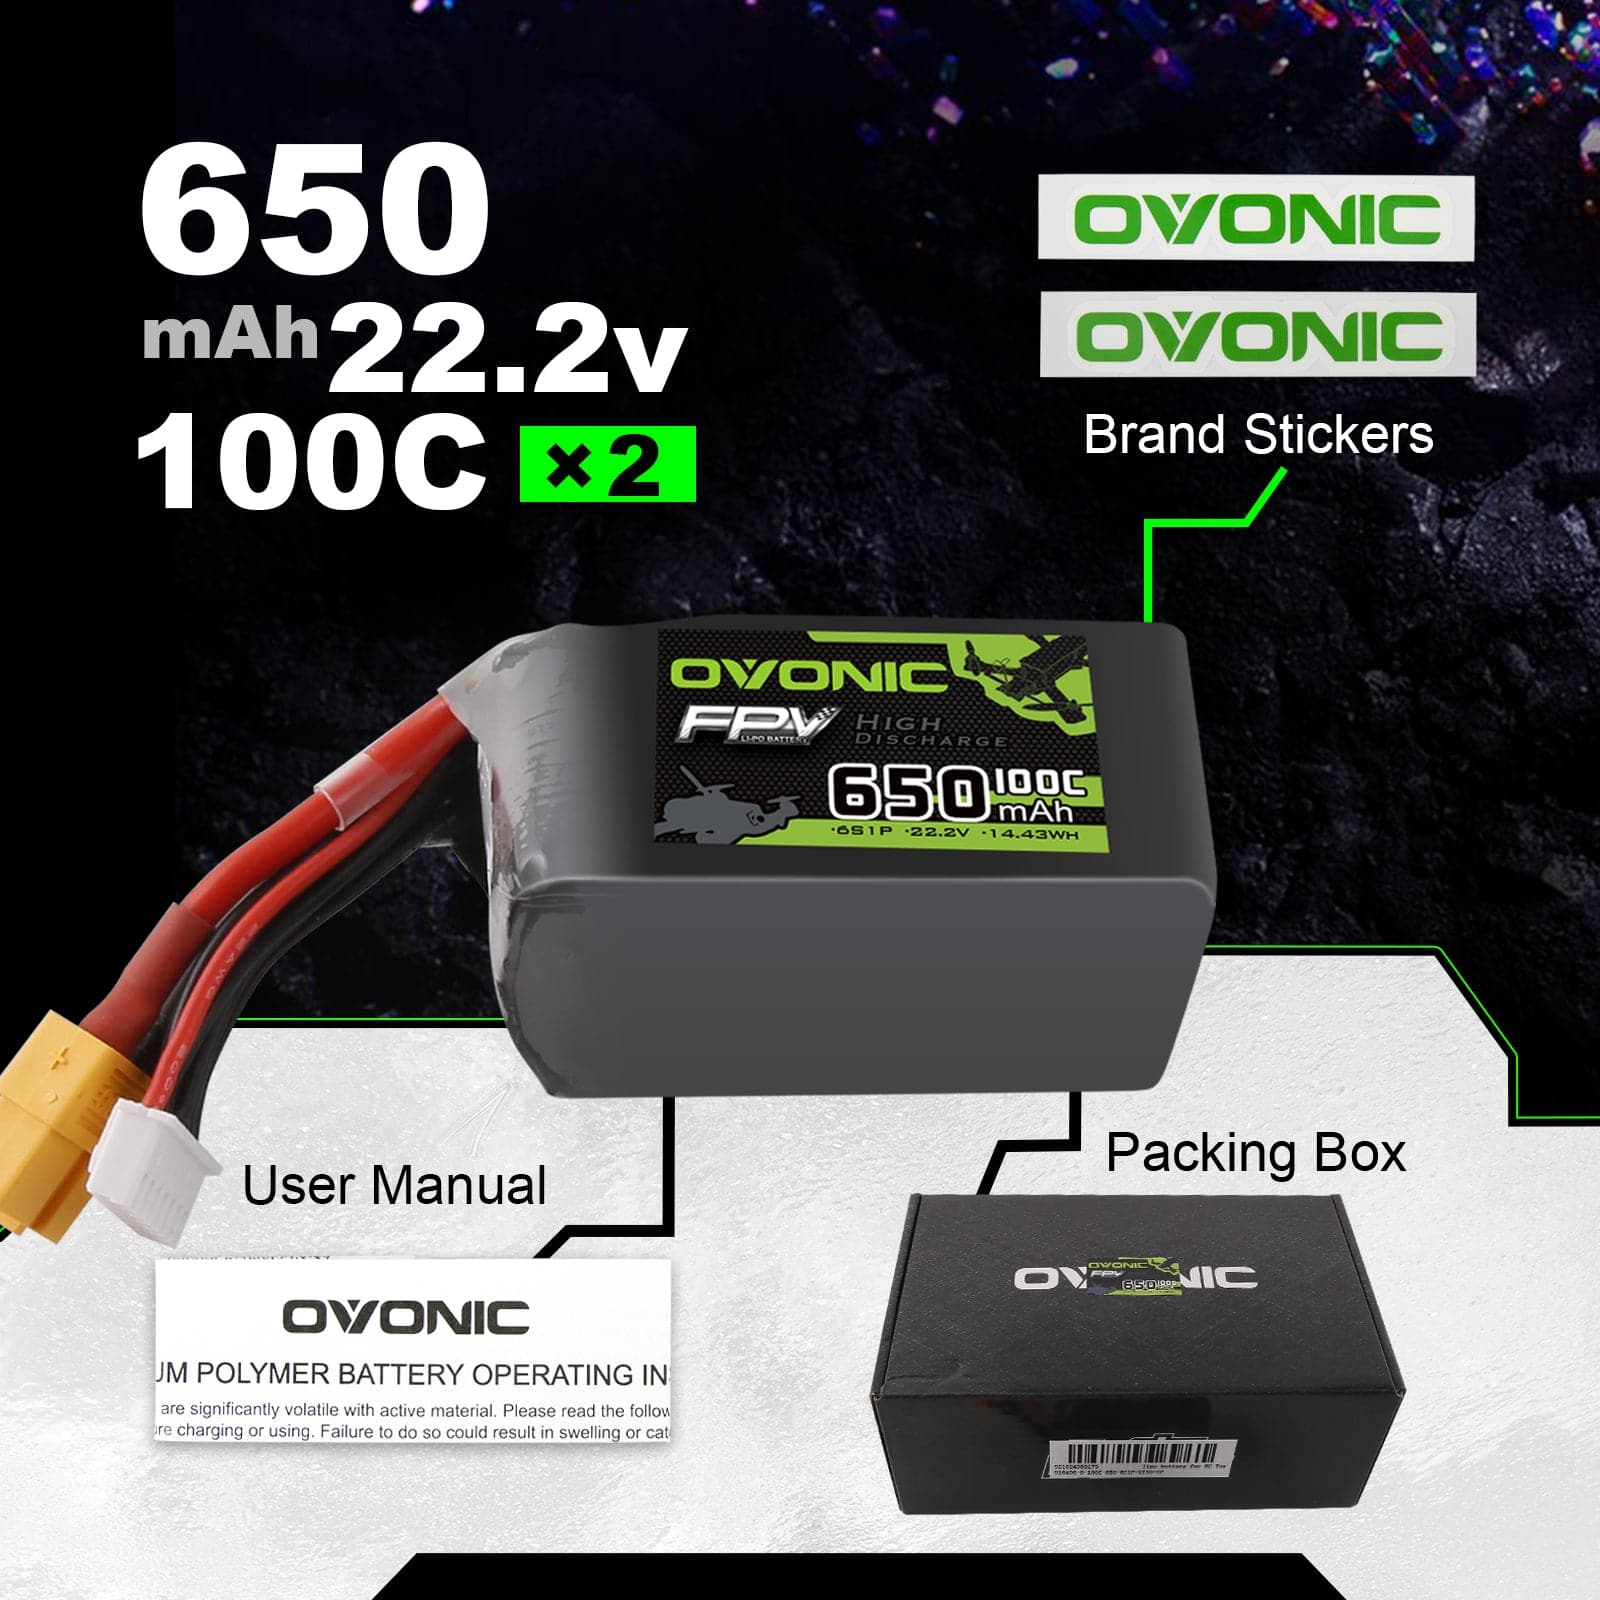 2x Ovonic 100C 6S 650mah Lipo Battery 22.2V Pack with XT30 Plug for fpv racing